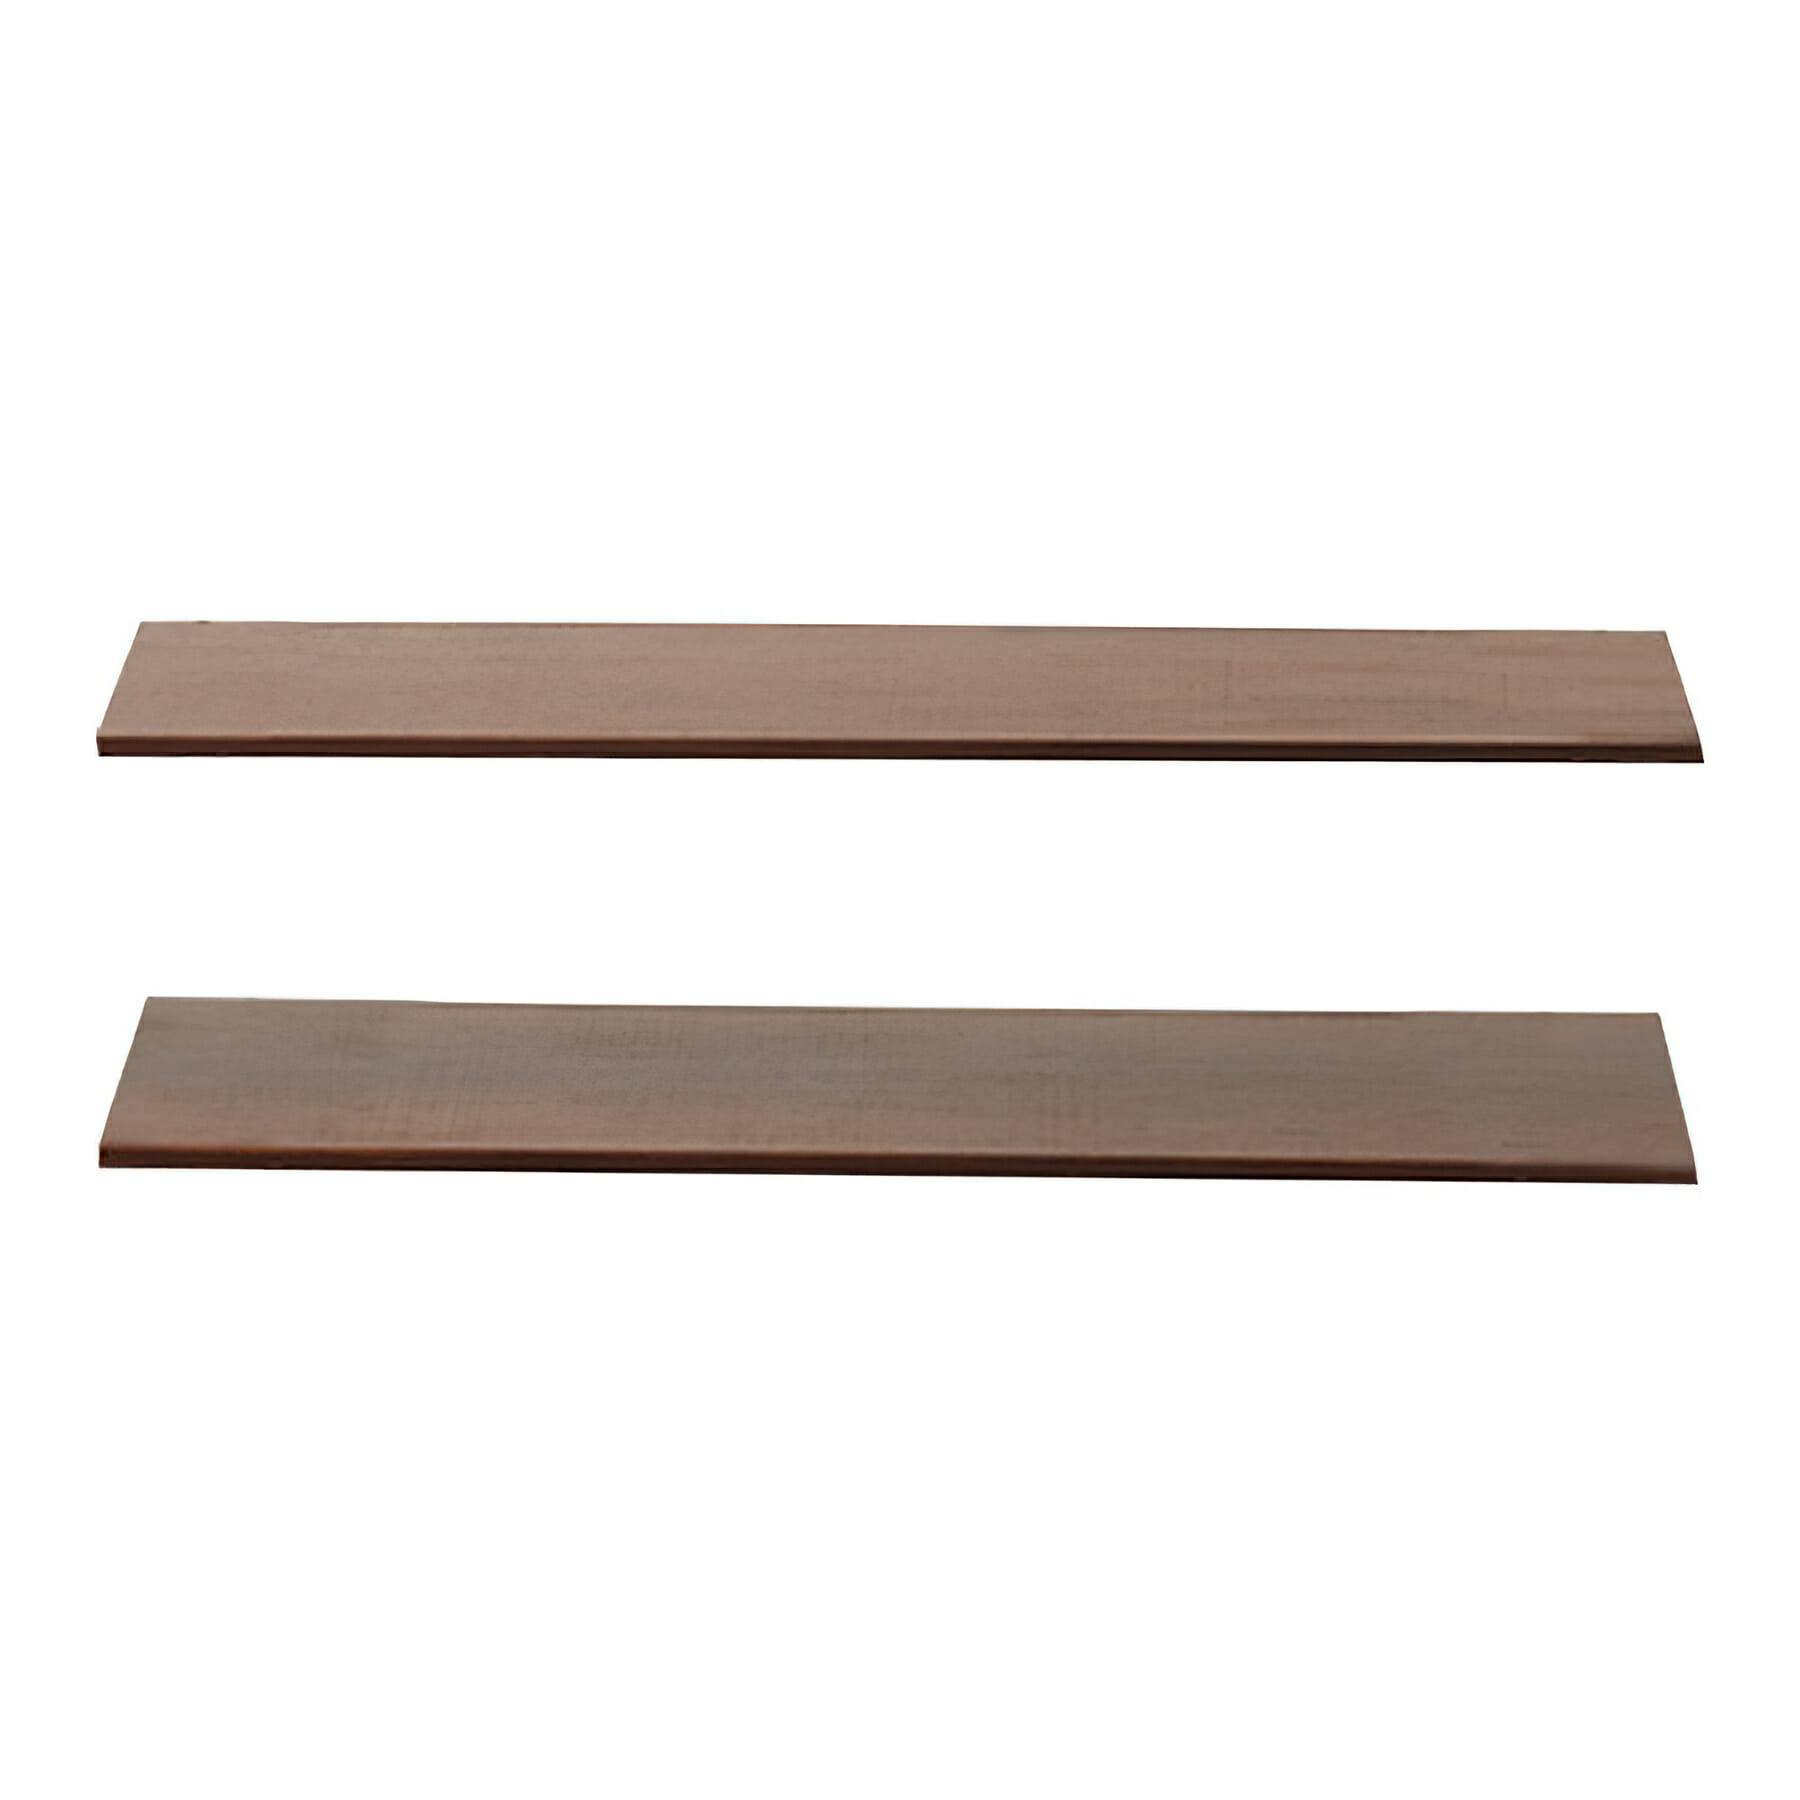 Set of 2 Wood Boards, 33.5" x 10", 33.5" x 14"